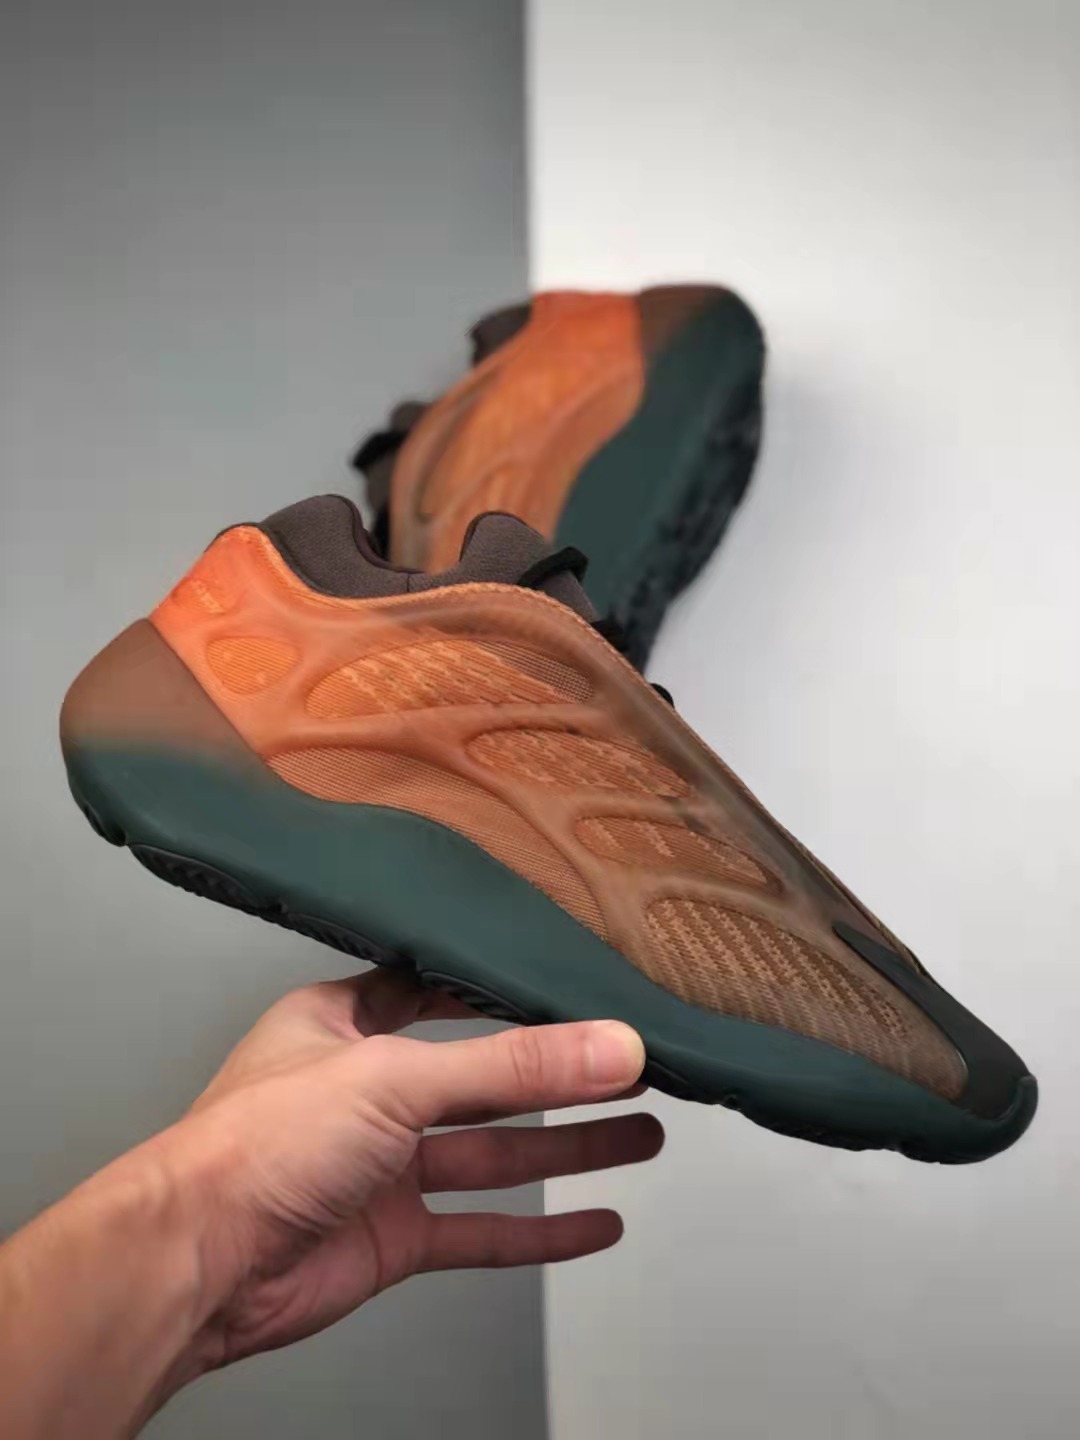 Adidas Yeezy 700 V3 'Copper Fade' GY4109 - Trendy and Stylish Sneakers